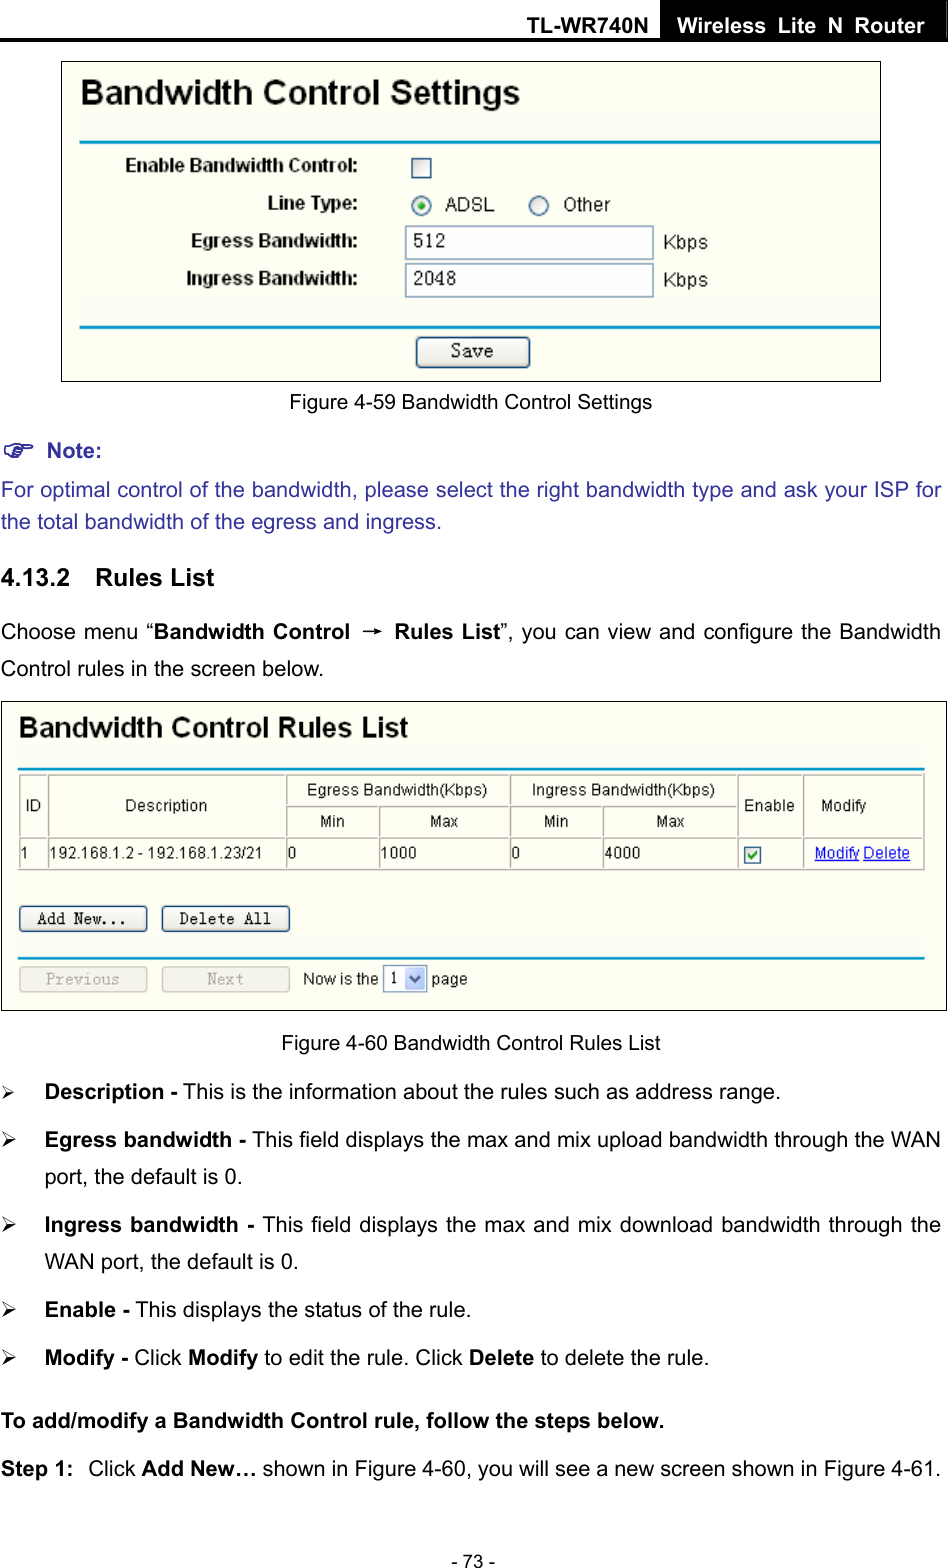 TL-WR740N Wireless Lite N Router  - 73 -  Figure 4-59 Bandwidth Control Settings ) Note: For optimal control of the bandwidth, please select the right bandwidth type and ask your ISP for the total bandwidth of the egress and ingress. 4.13.2  Rules List Choose menu “Bandwidth Control → Rules List”, you can view and configure the Bandwidth Control rules in the screen below.  Figure 4-60 Bandwidth Control Rules List ¾ Description - This is the information about the rules such as address range. ¾ Egress bandwidth - This field displays the max and mix upload bandwidth through the WAN port, the default is 0. ¾ Ingress bandwidth - This field displays the max and mix download bandwidth through the WAN port, the default is 0. ¾ Enable - This displays the status of the rule. ¾ Modify - Click Modify to edit the rule. Click Delete to delete the rule. To add/modify a Bandwidth Control rule, follow the steps below. Step 1:  Click Add New… shown in Figure 4-60, you will see a new screen shown in Figure 4-61. 